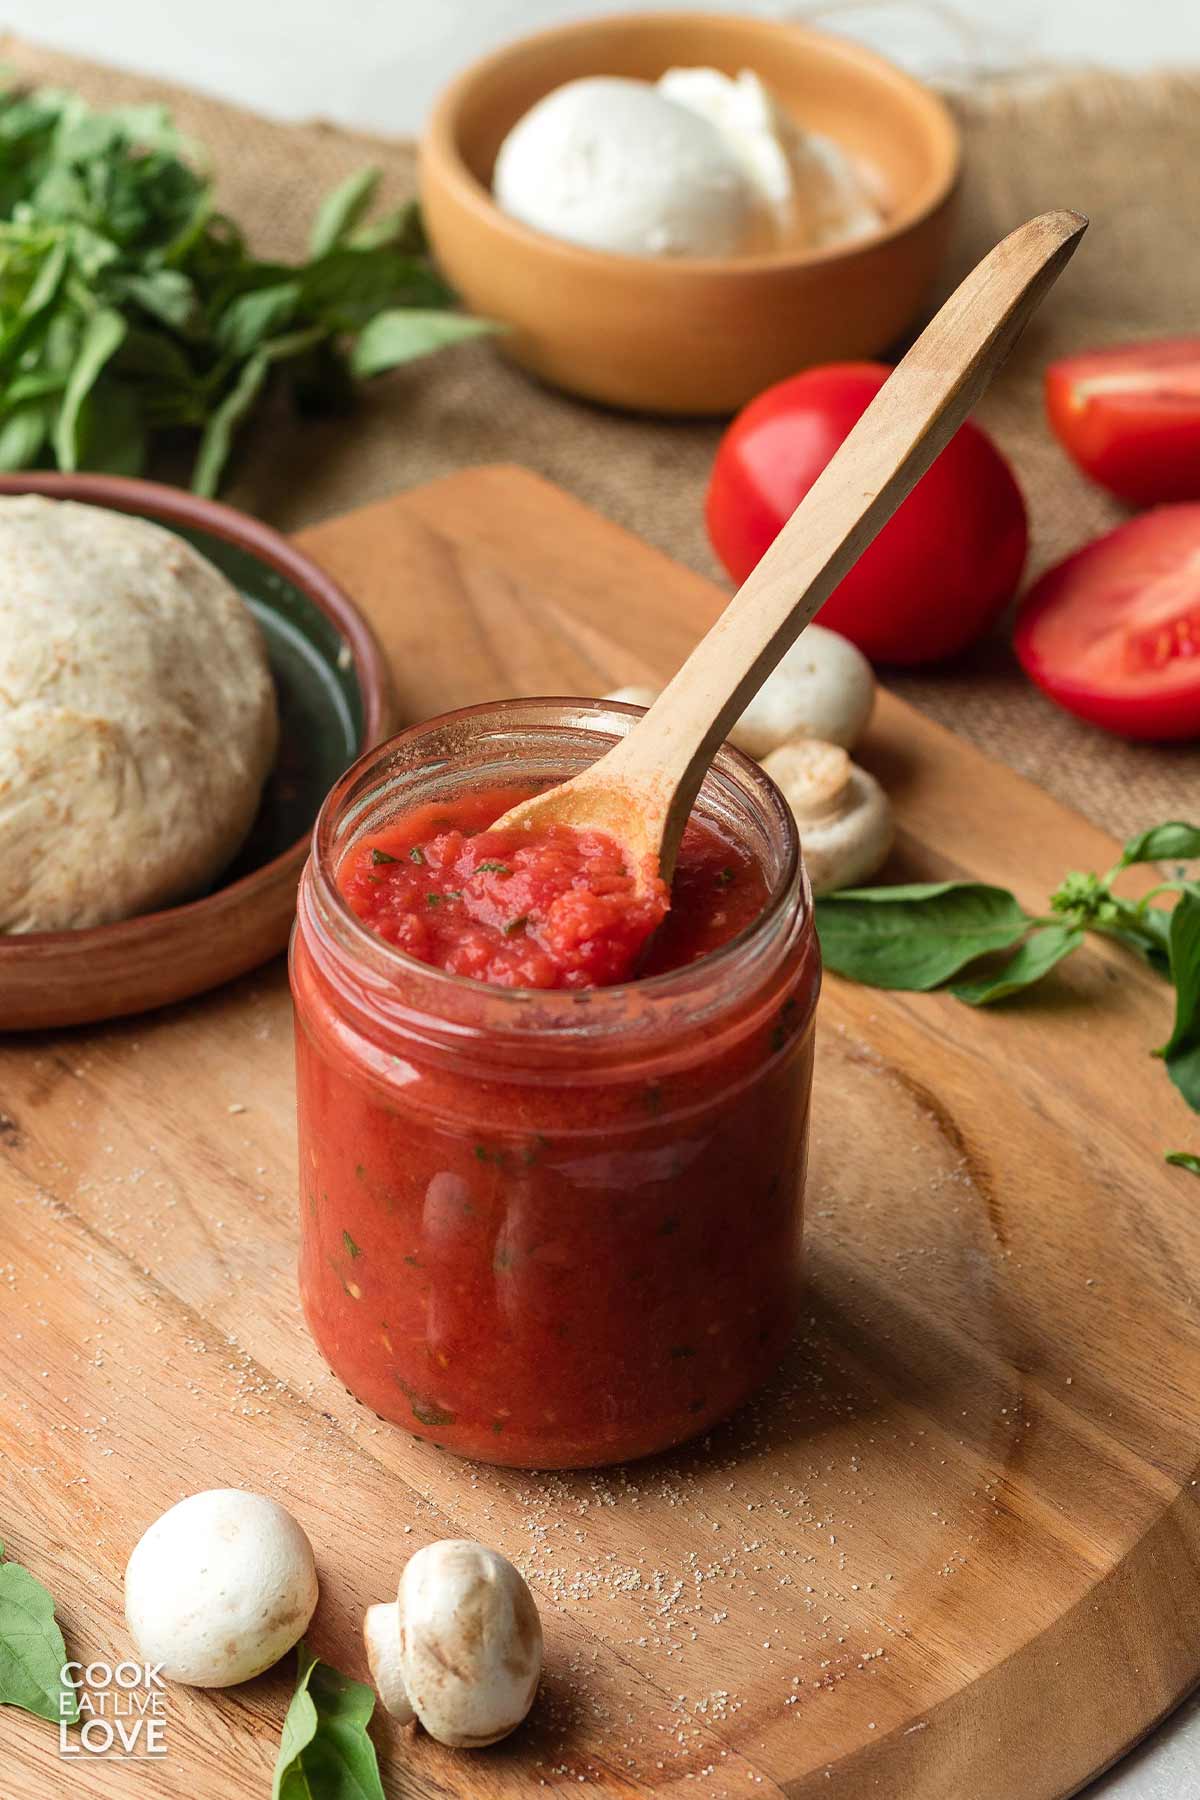 A jar of homemade pizza sauce using fresh tomatoes on the table with a spoon dipping some out.